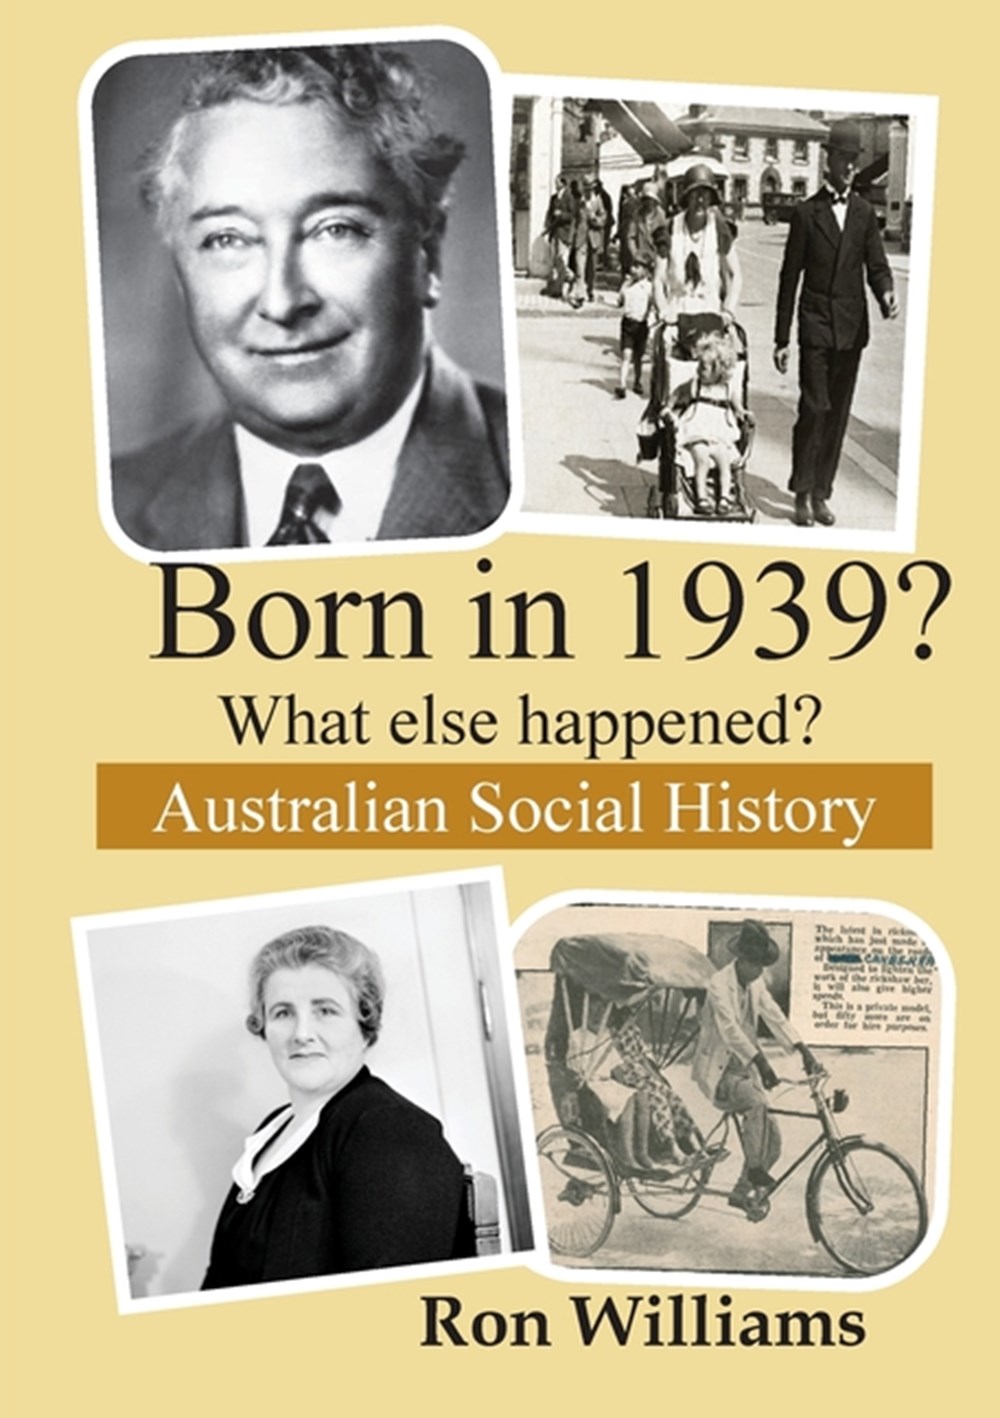 Born in 1939? What else happened?